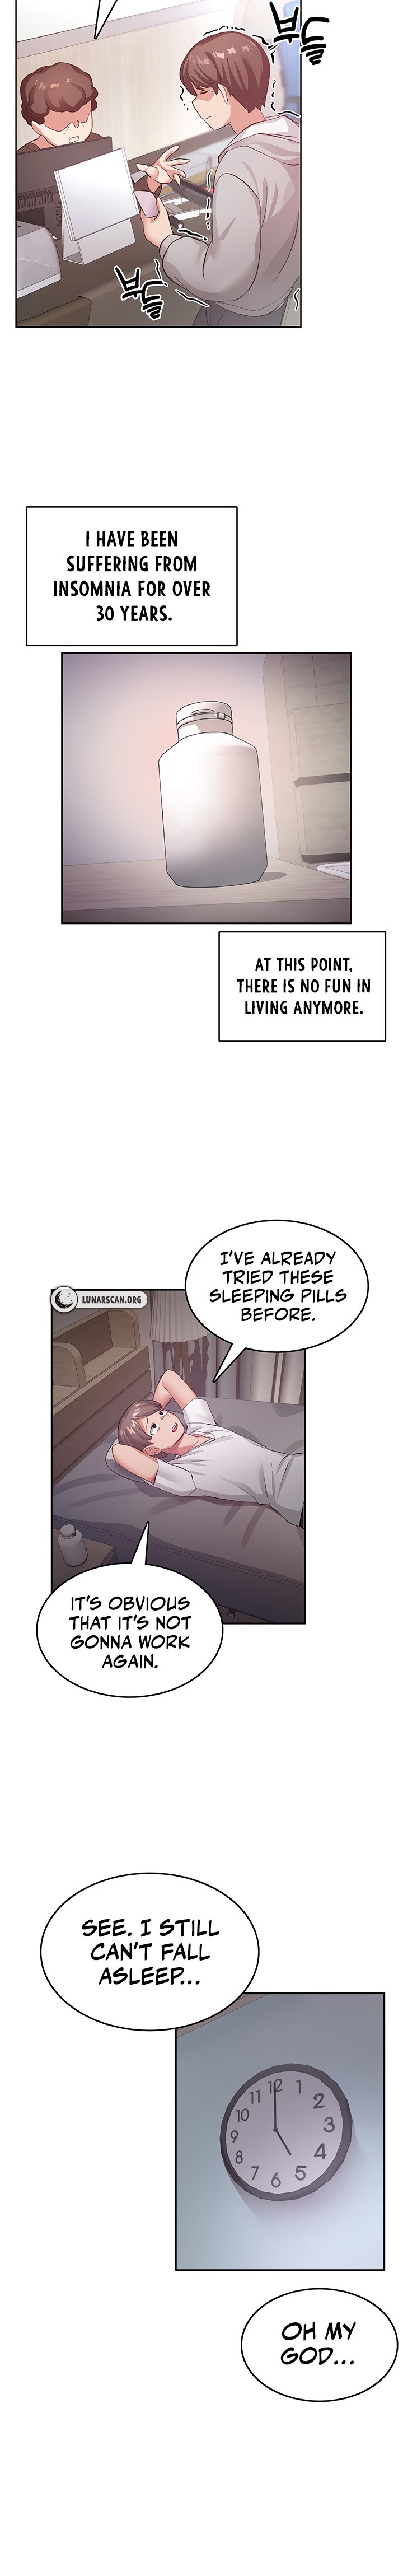 Relationship Reverse Button: Let’s Cure That Arrogant Girl Chapter 1 - Page 3